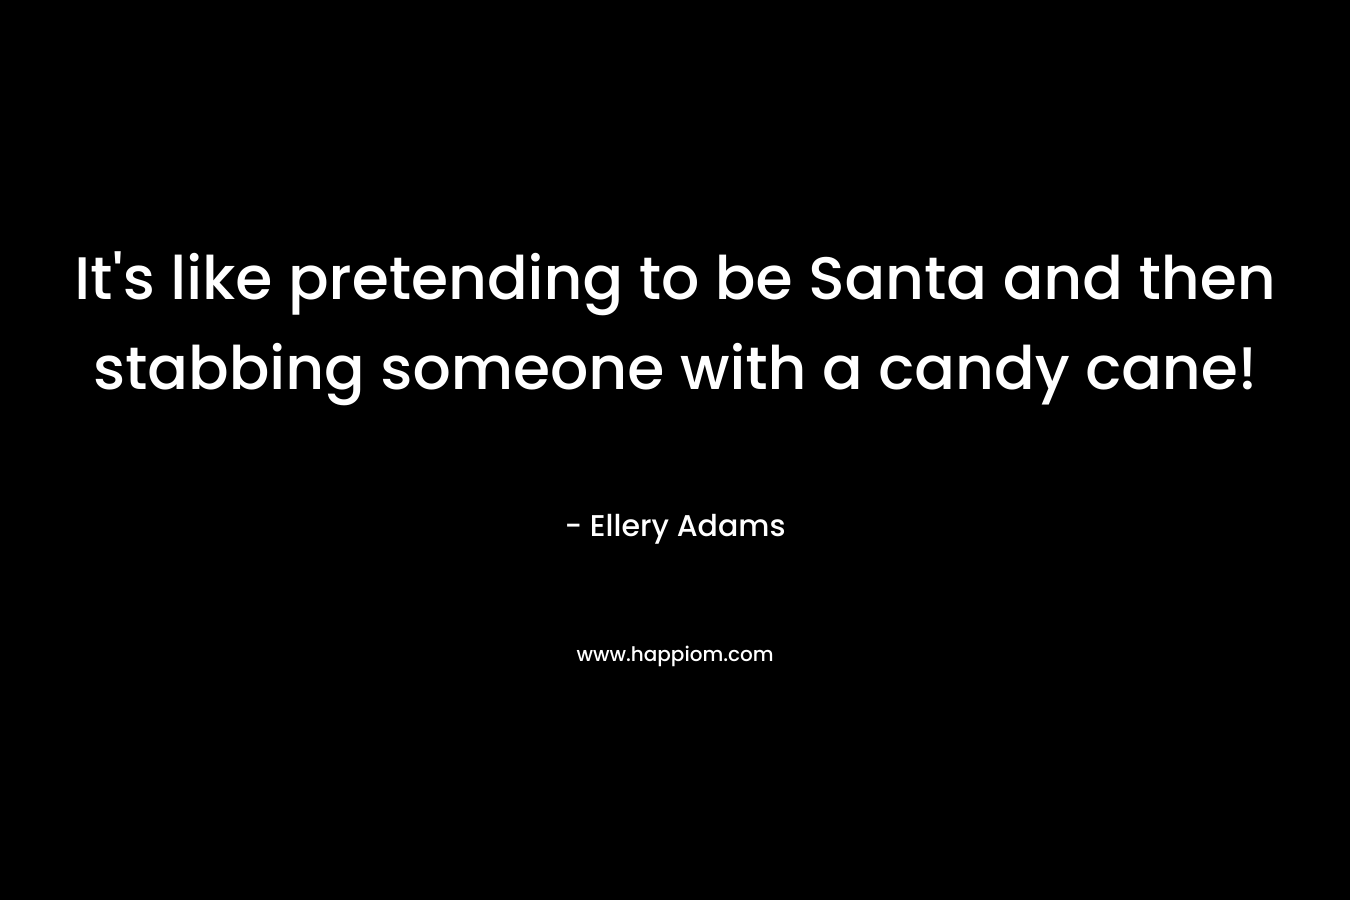 It’s like pretending to be Santa and then stabbing someone with a candy cane! – Ellery Adams